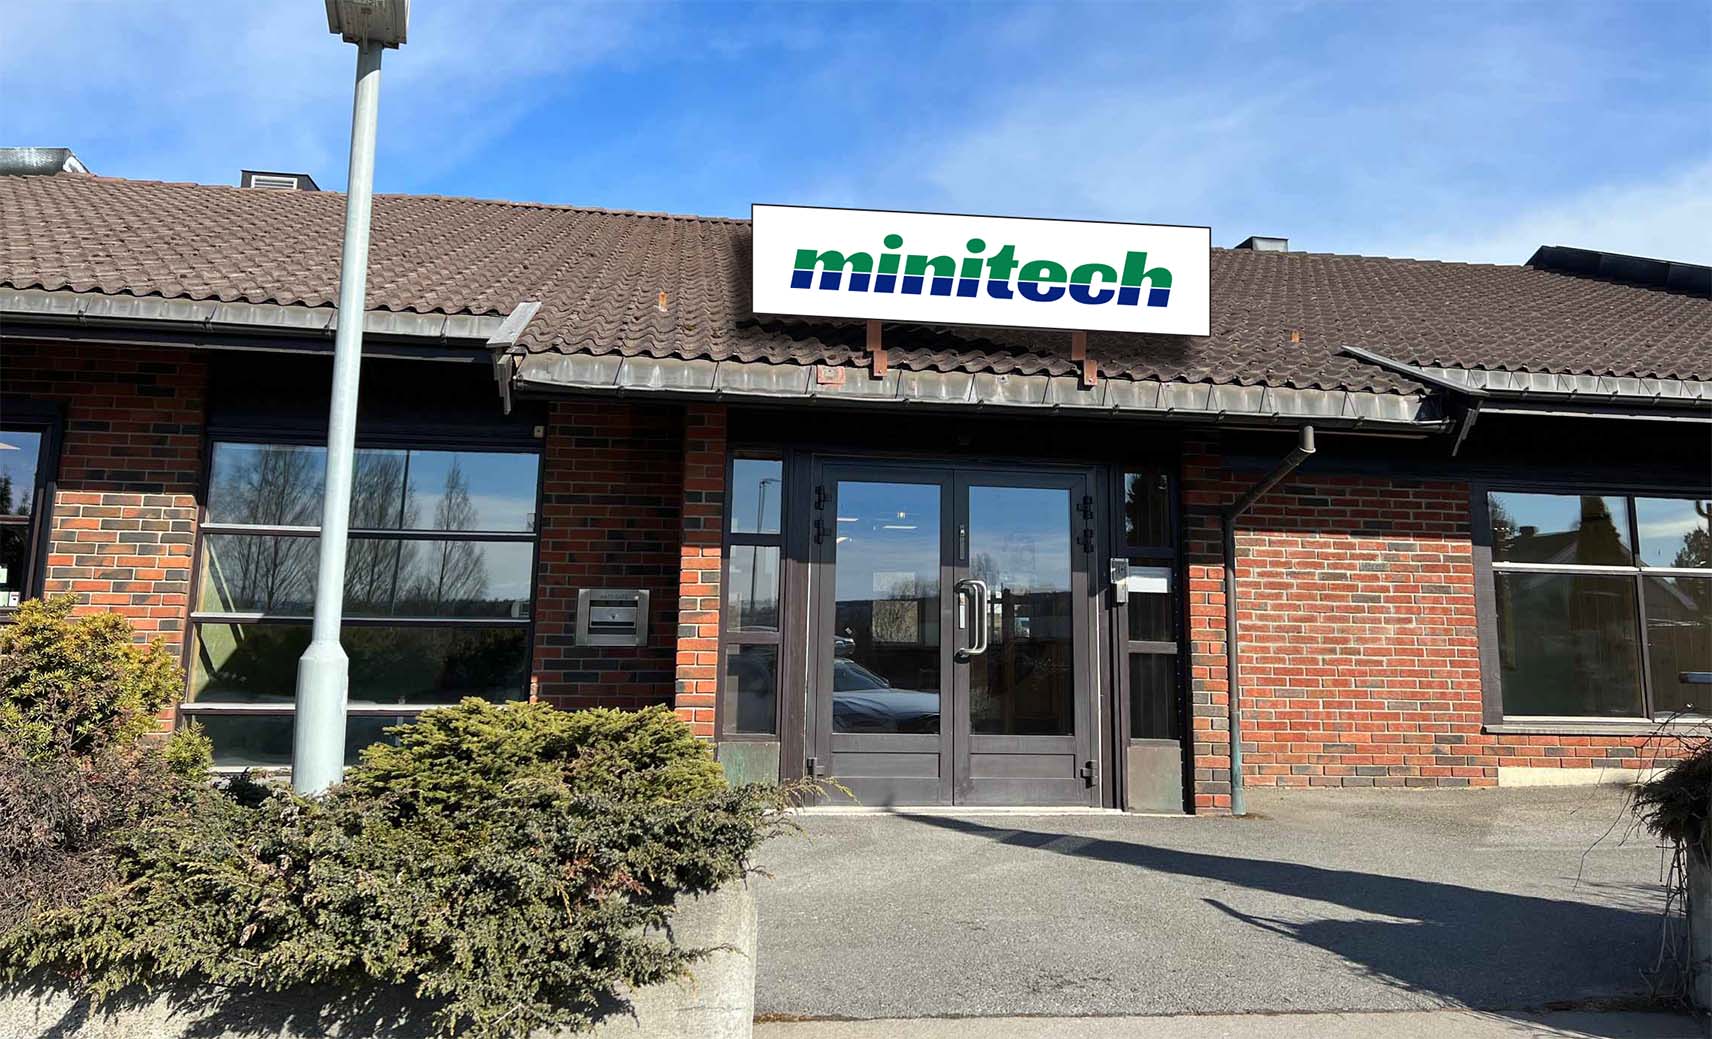 the main office location of minitech as